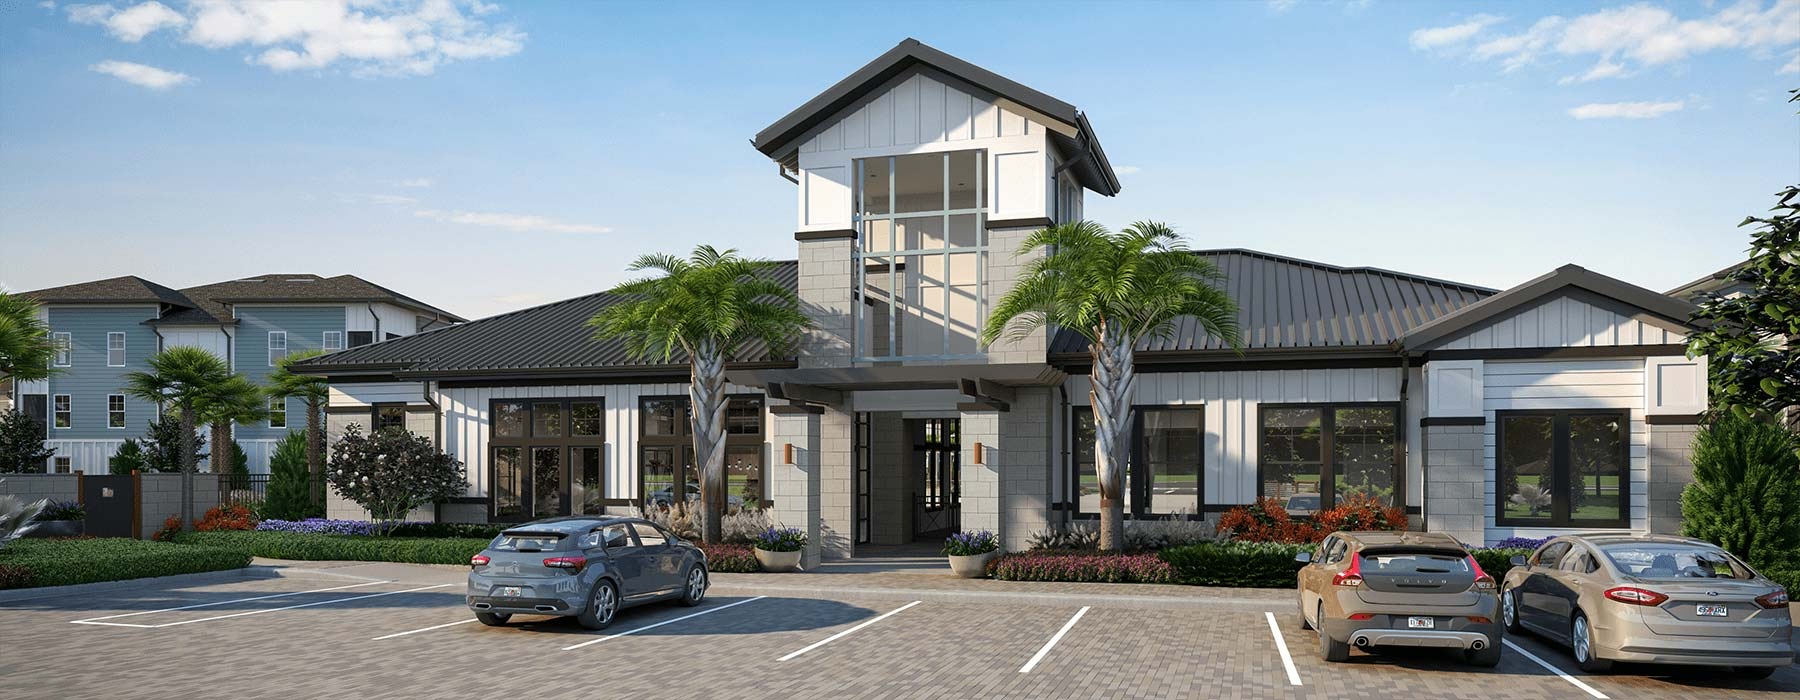 rendering of entrance to Bainbridge Sunlake showing ample parking and tropical landscaping